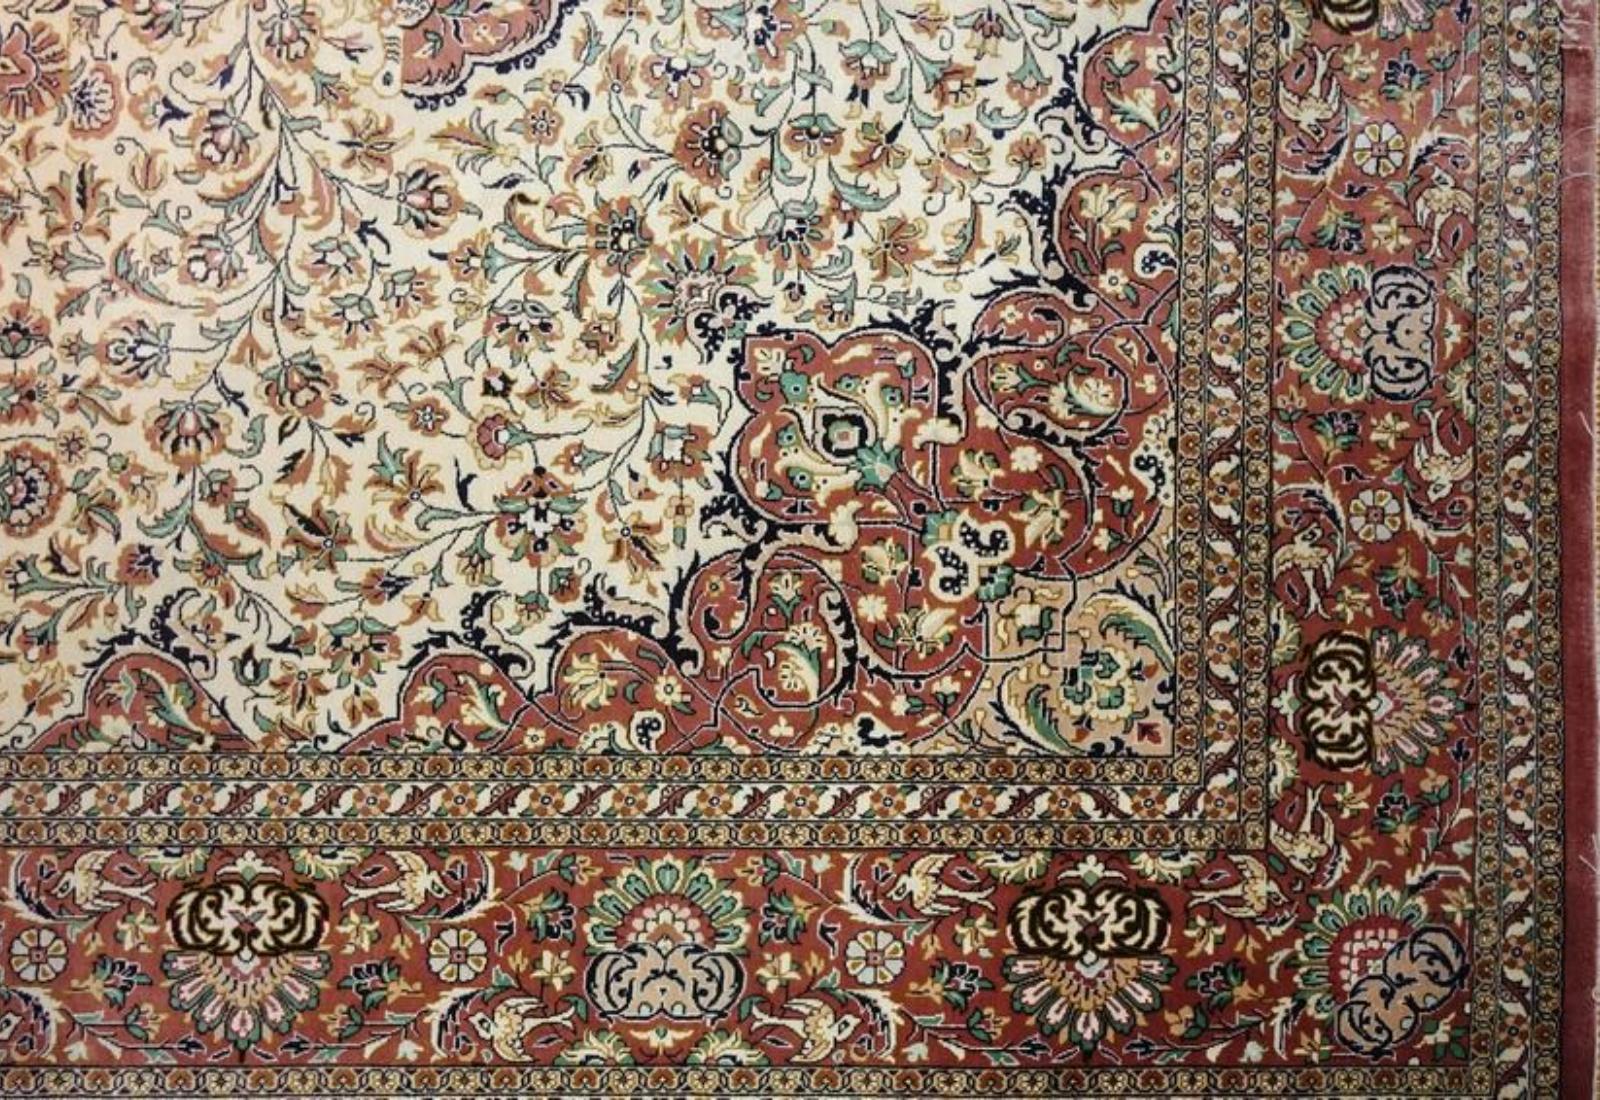 Very fine Persian Silk Qum - 7.1' 5.2' In Good Condition For Sale In Newmanstown, PA